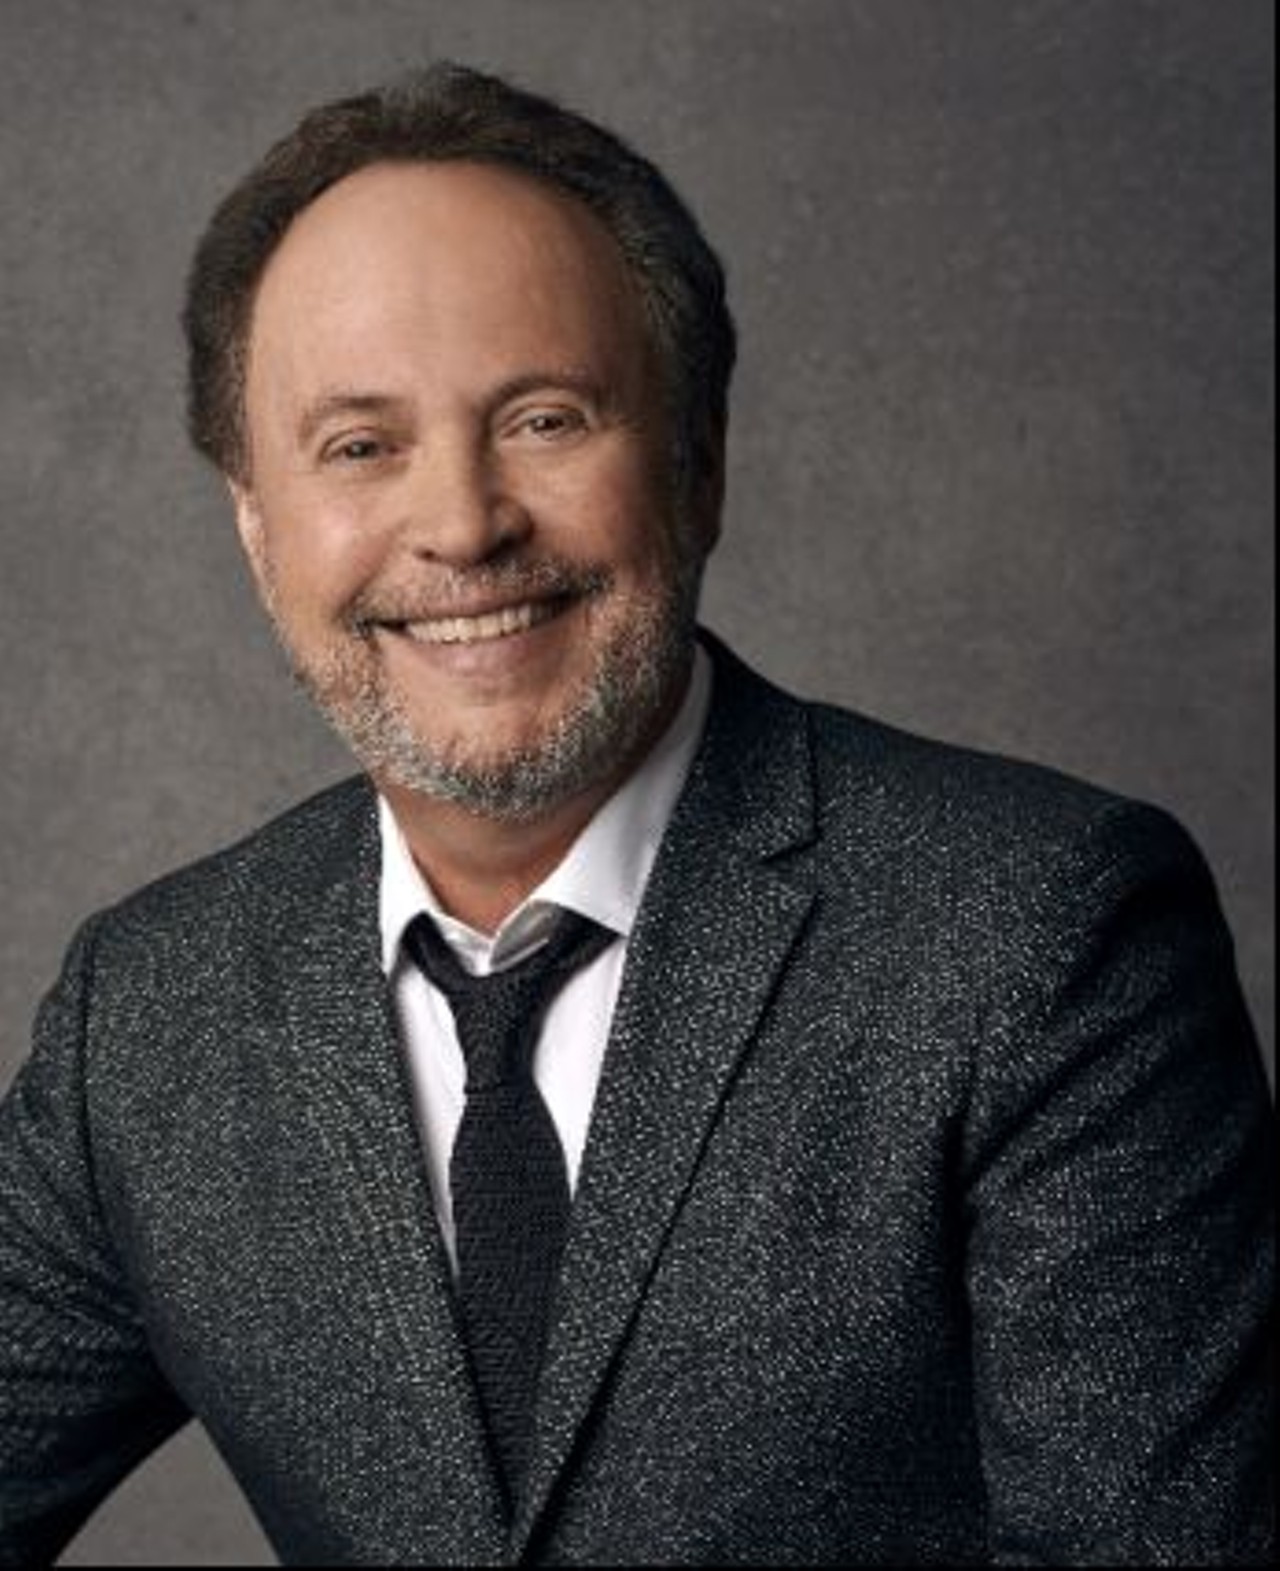 Billy Crystal
Wednesday, March 29 
Photo Provided